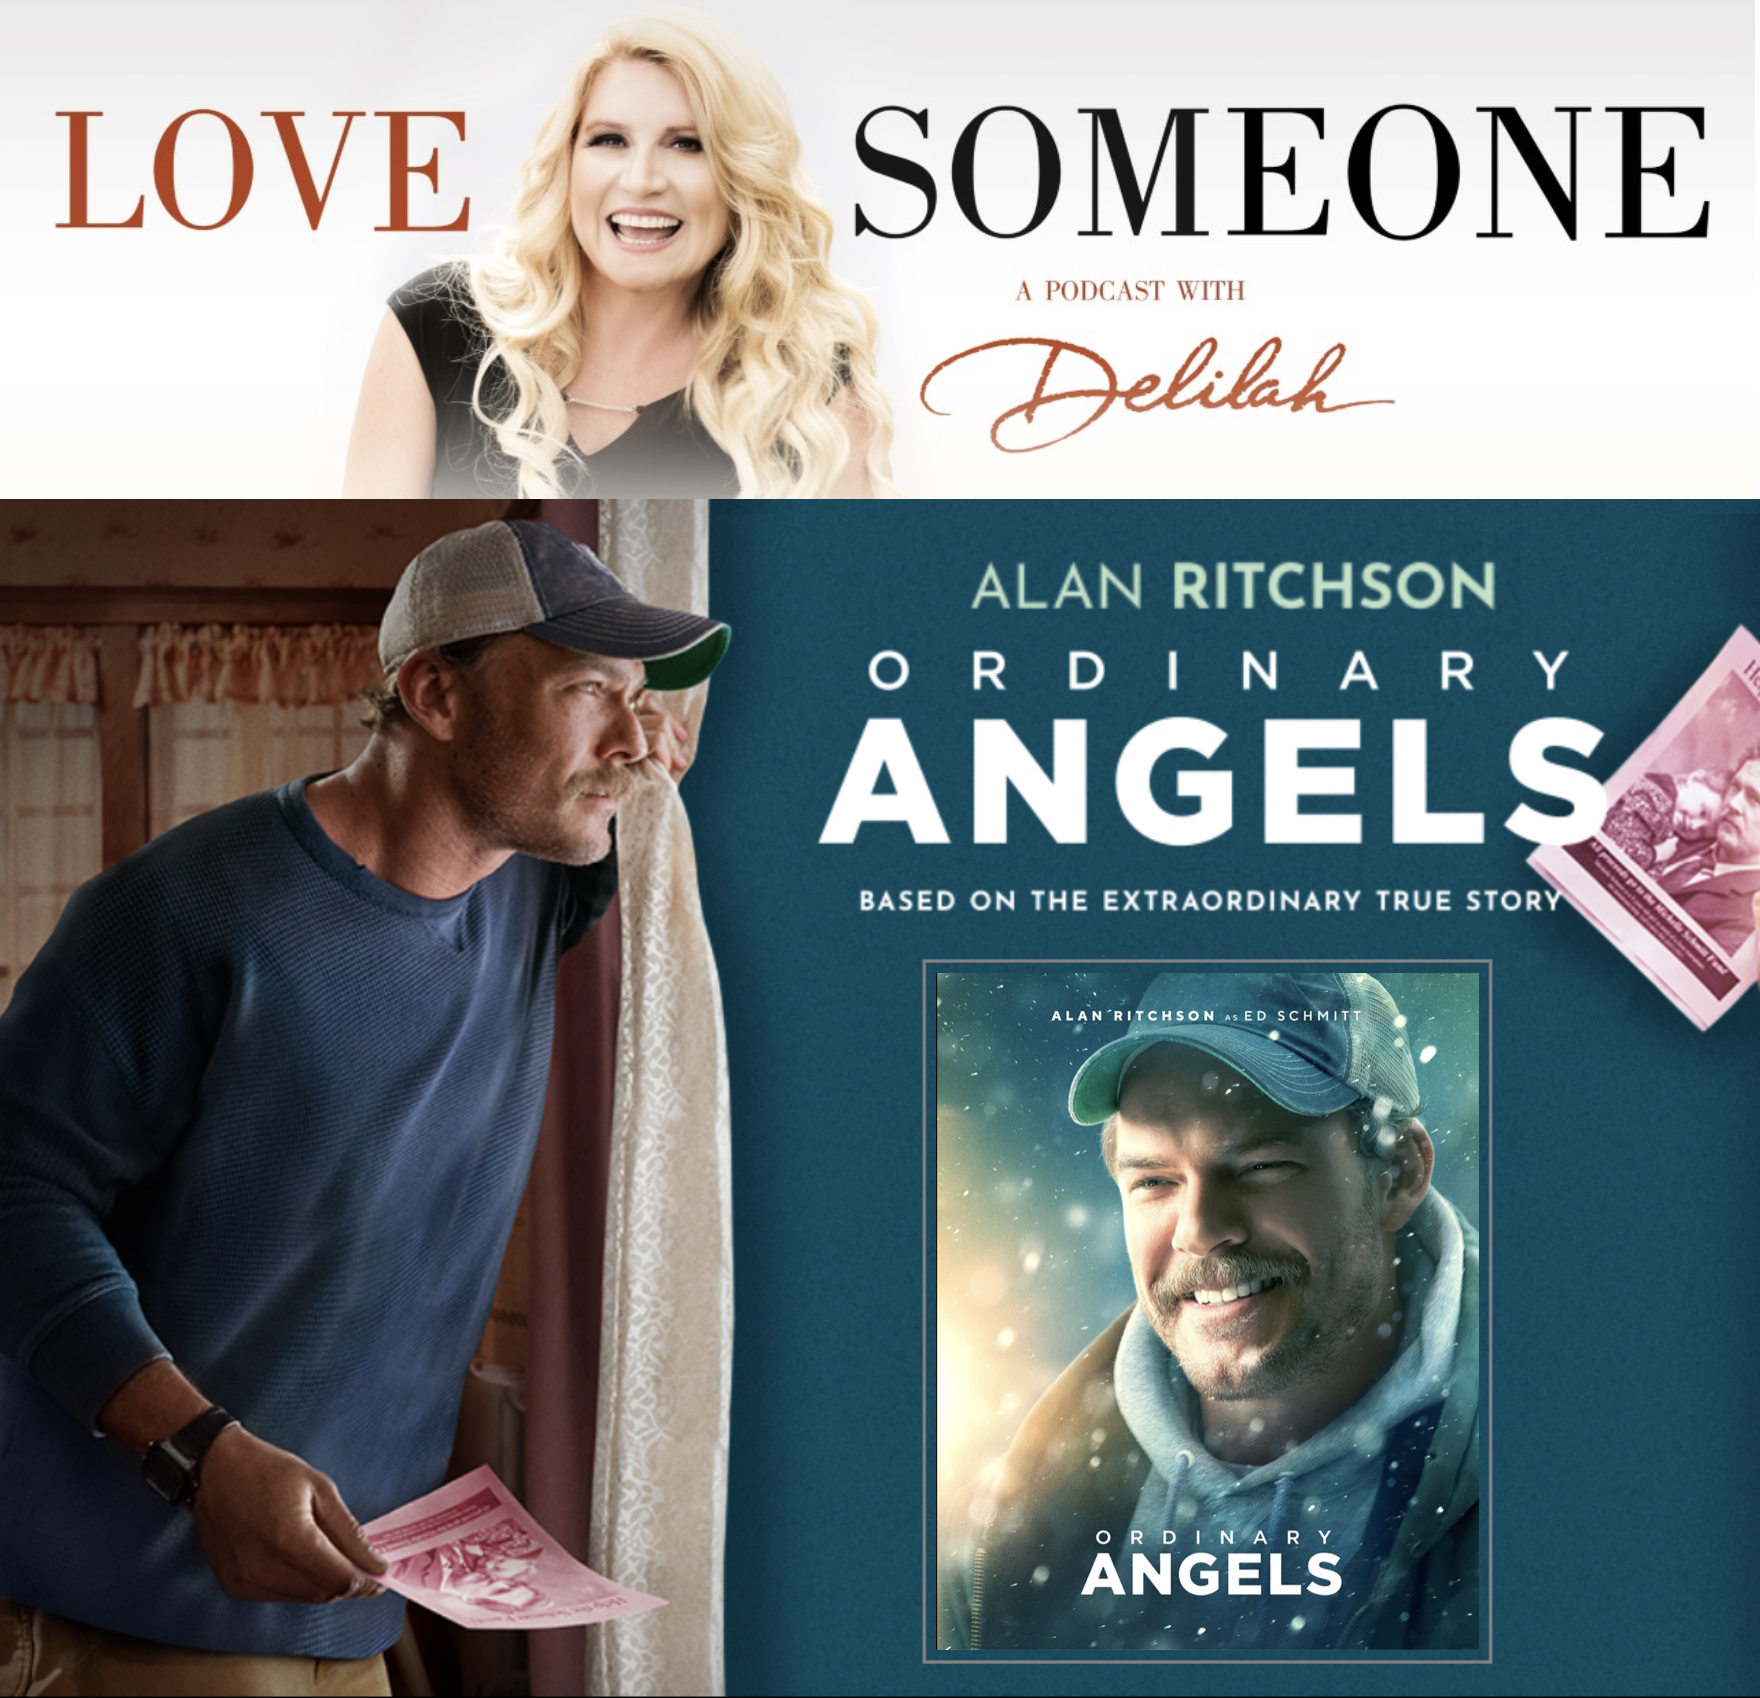 ALAN RITCHSON: "Ordinary Angels"